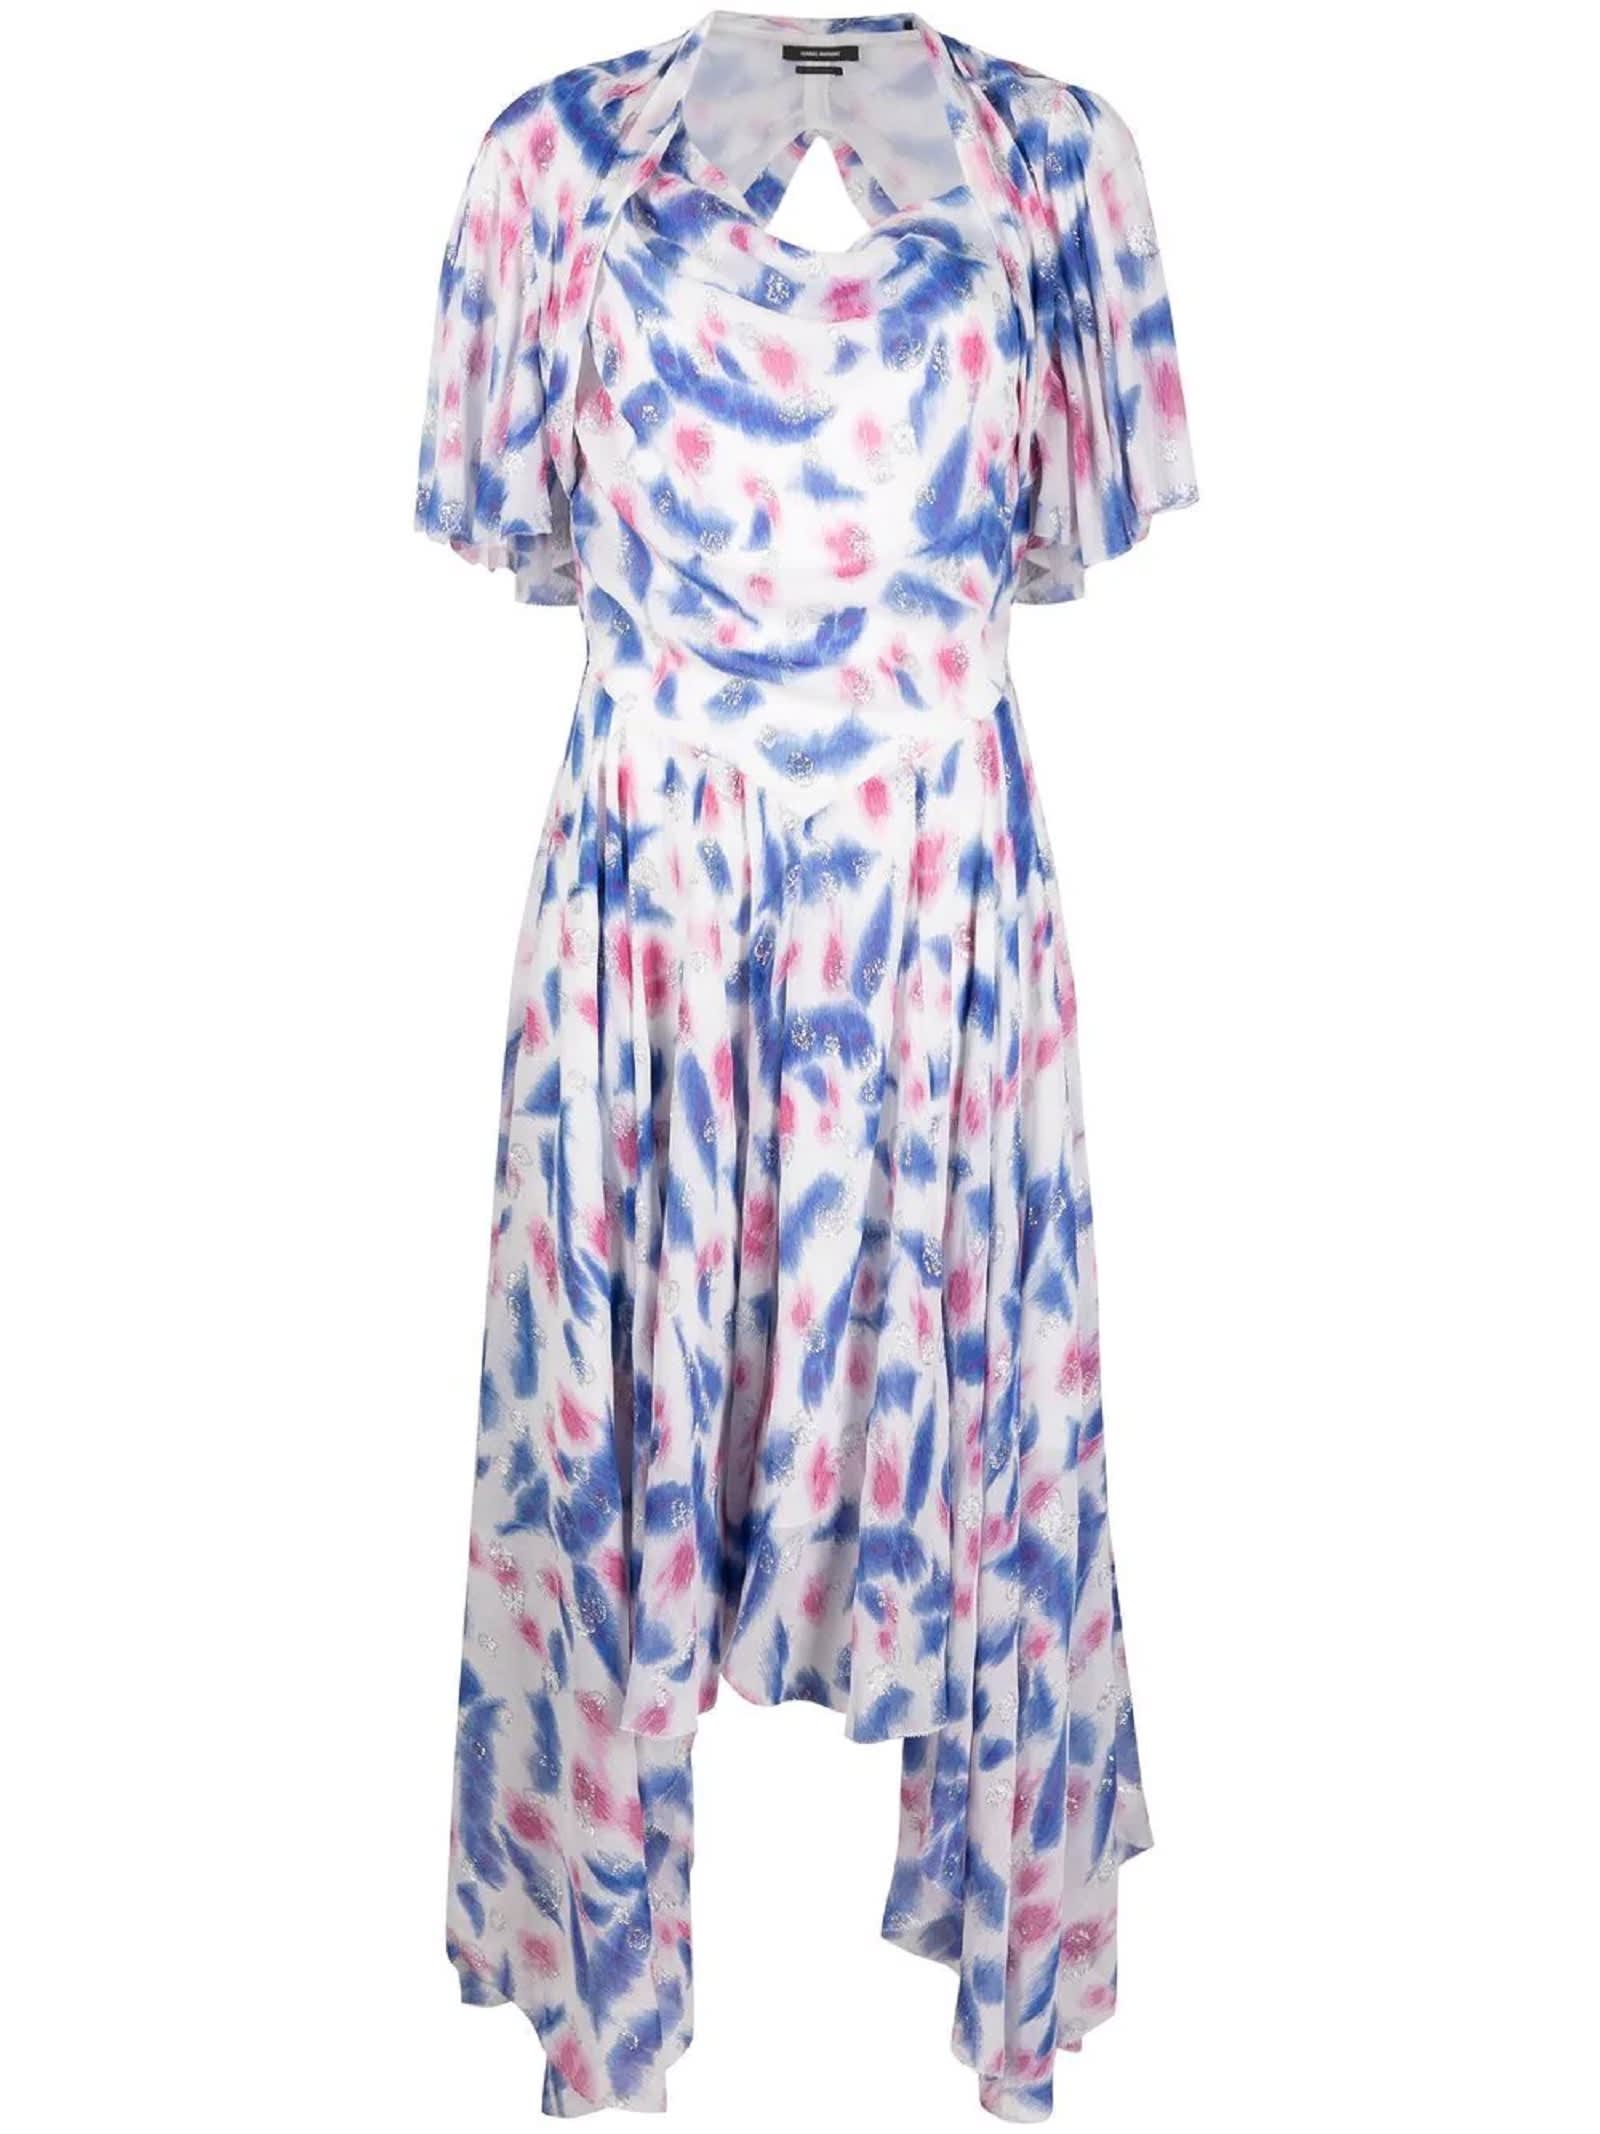 Isabel Marant White, Blue And Pink Silk Dress